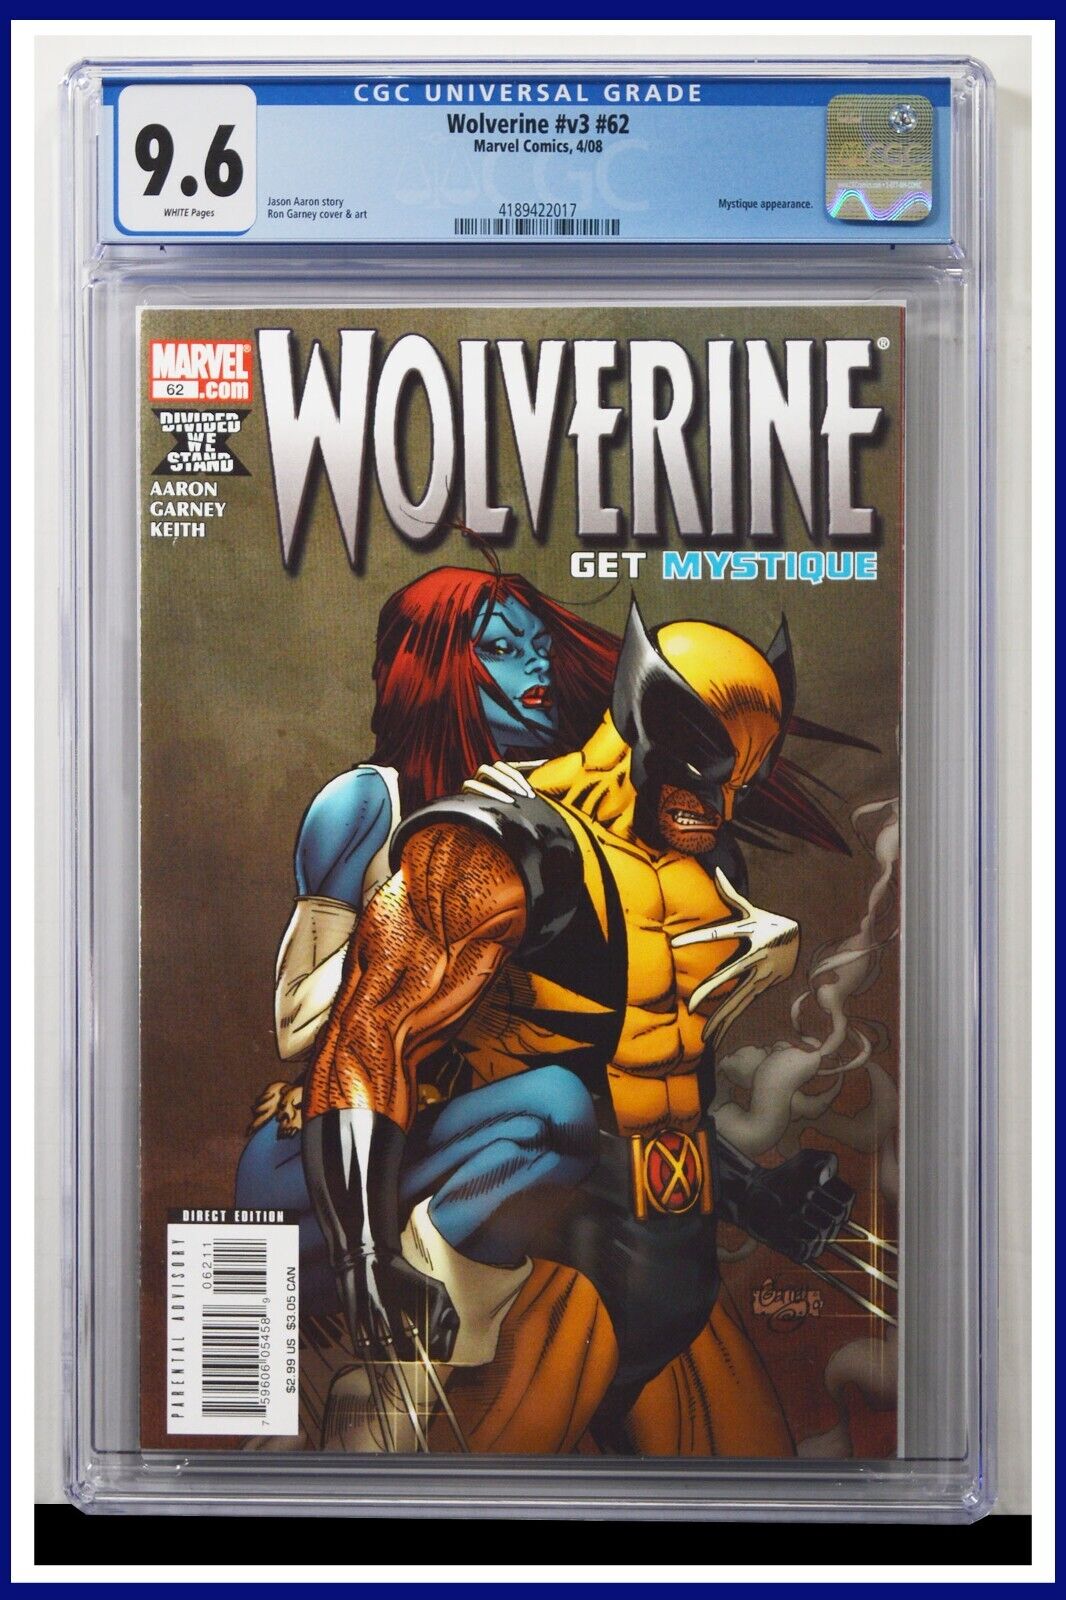 Wolverine #v3 #62 CGC Graded 9.6 Marvel April 2008 White Pages Comic Book.